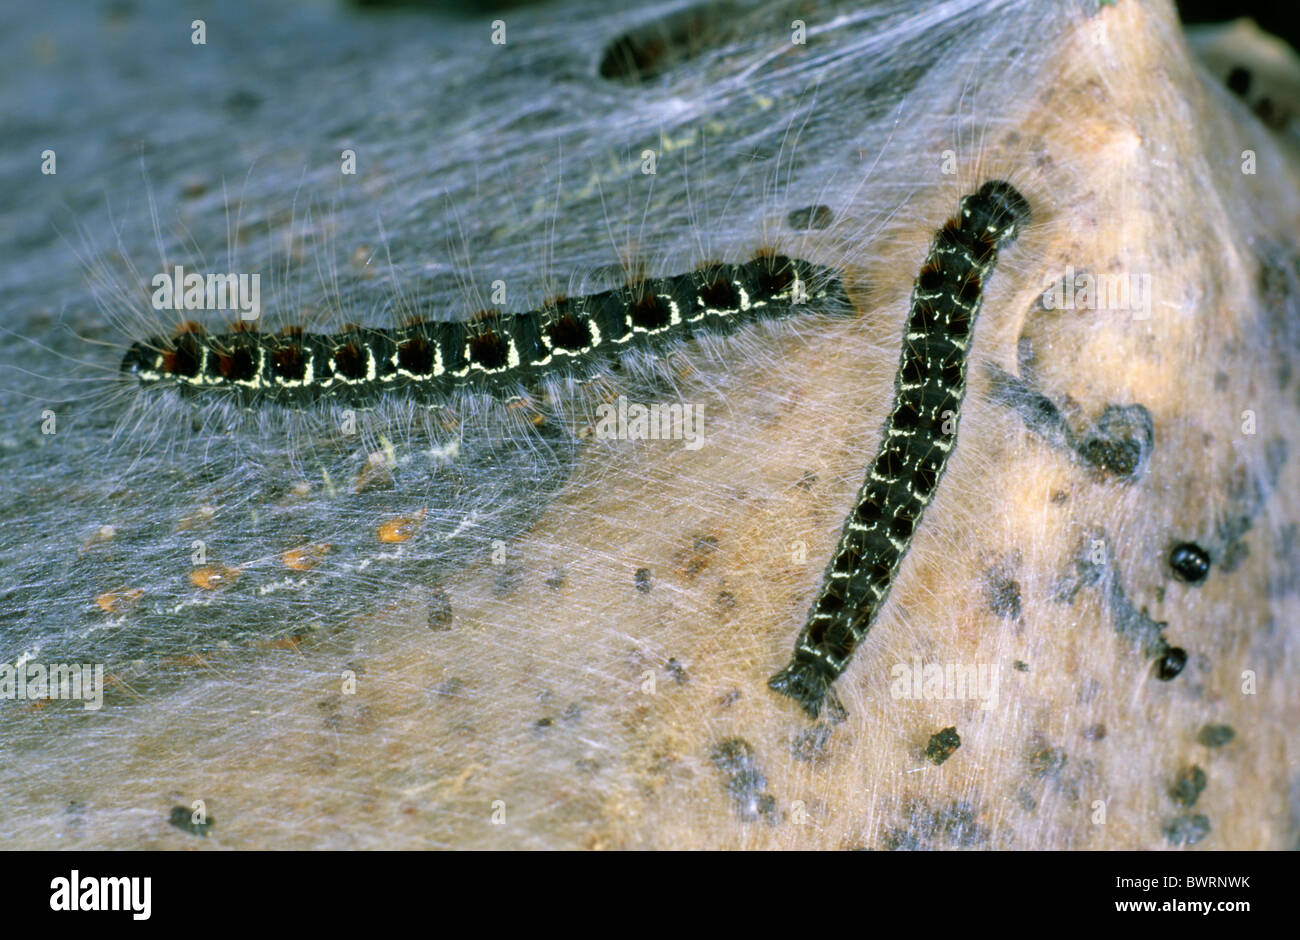 Small Eggar (Eriogaster lanestris), caterpillars outside of their communal cocoon Stock Photo